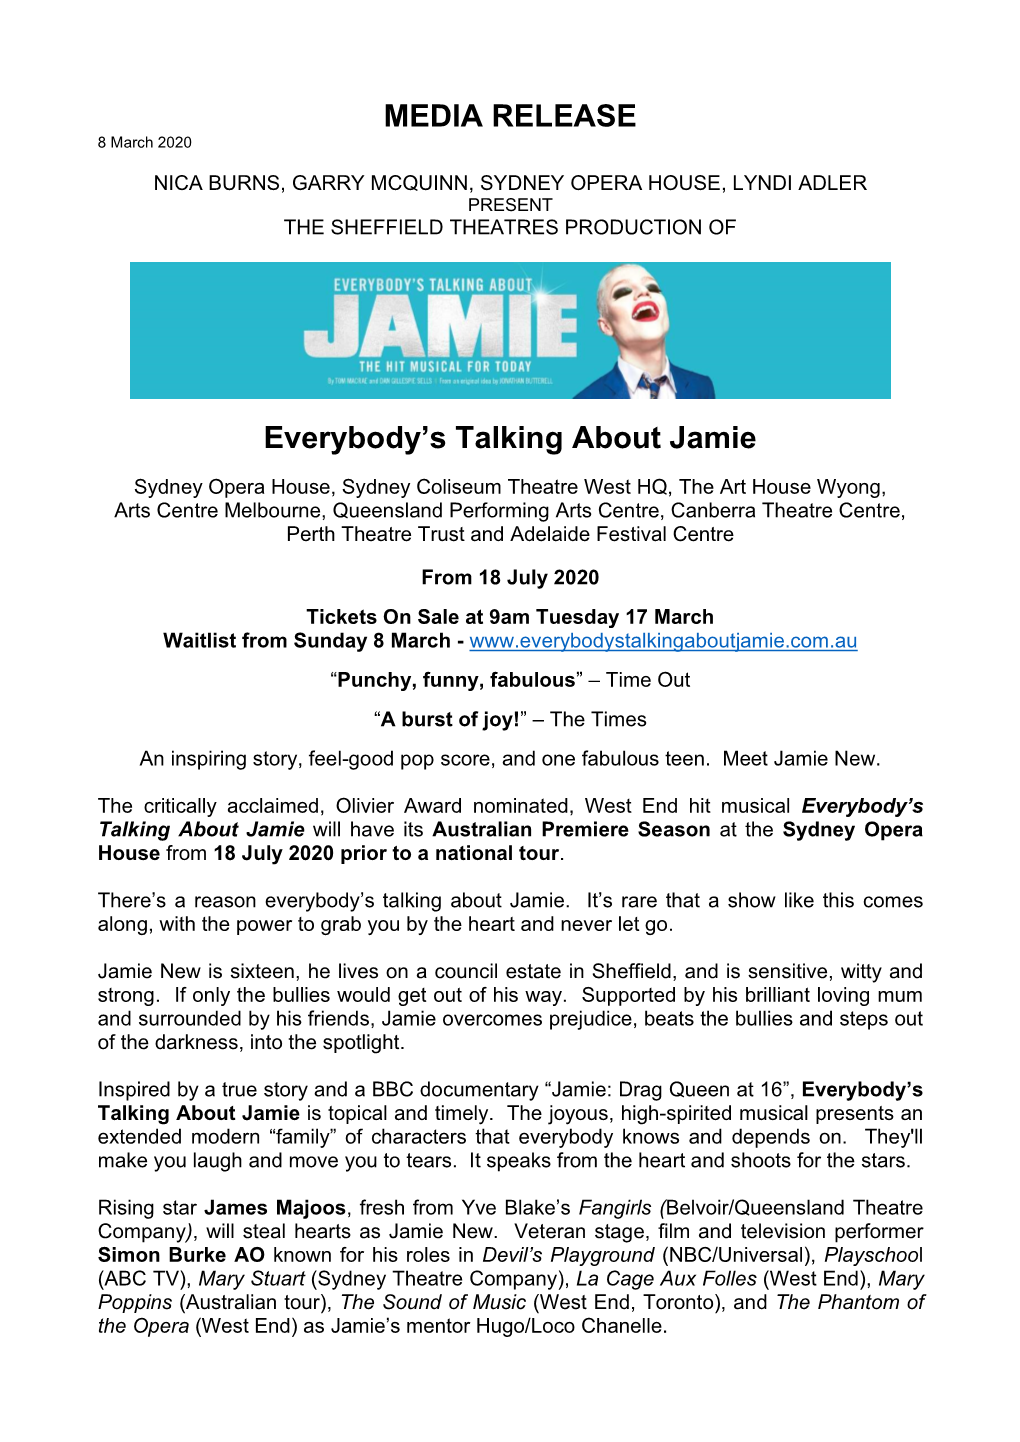 MEDIA RELEASE Everybody's Talking About Jamie